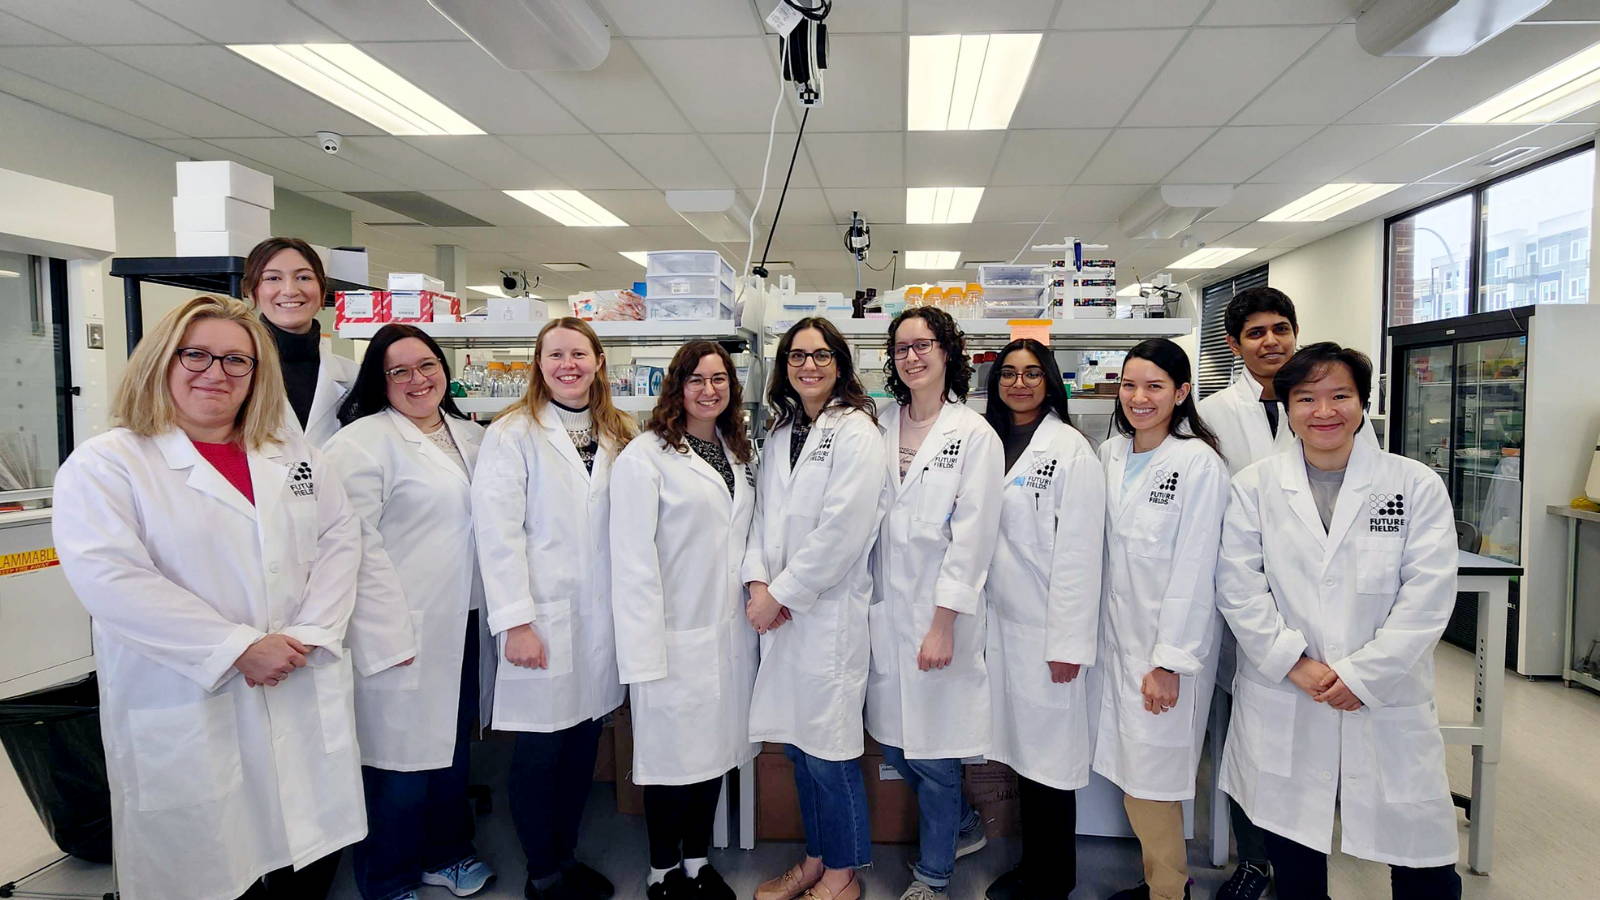 Future Fields makes ethical growth factors for the sustainable scientist. We are proud supporters of women in STEM. Future Fields women scientists pose for a photo for International Day of Women and Girls in Science